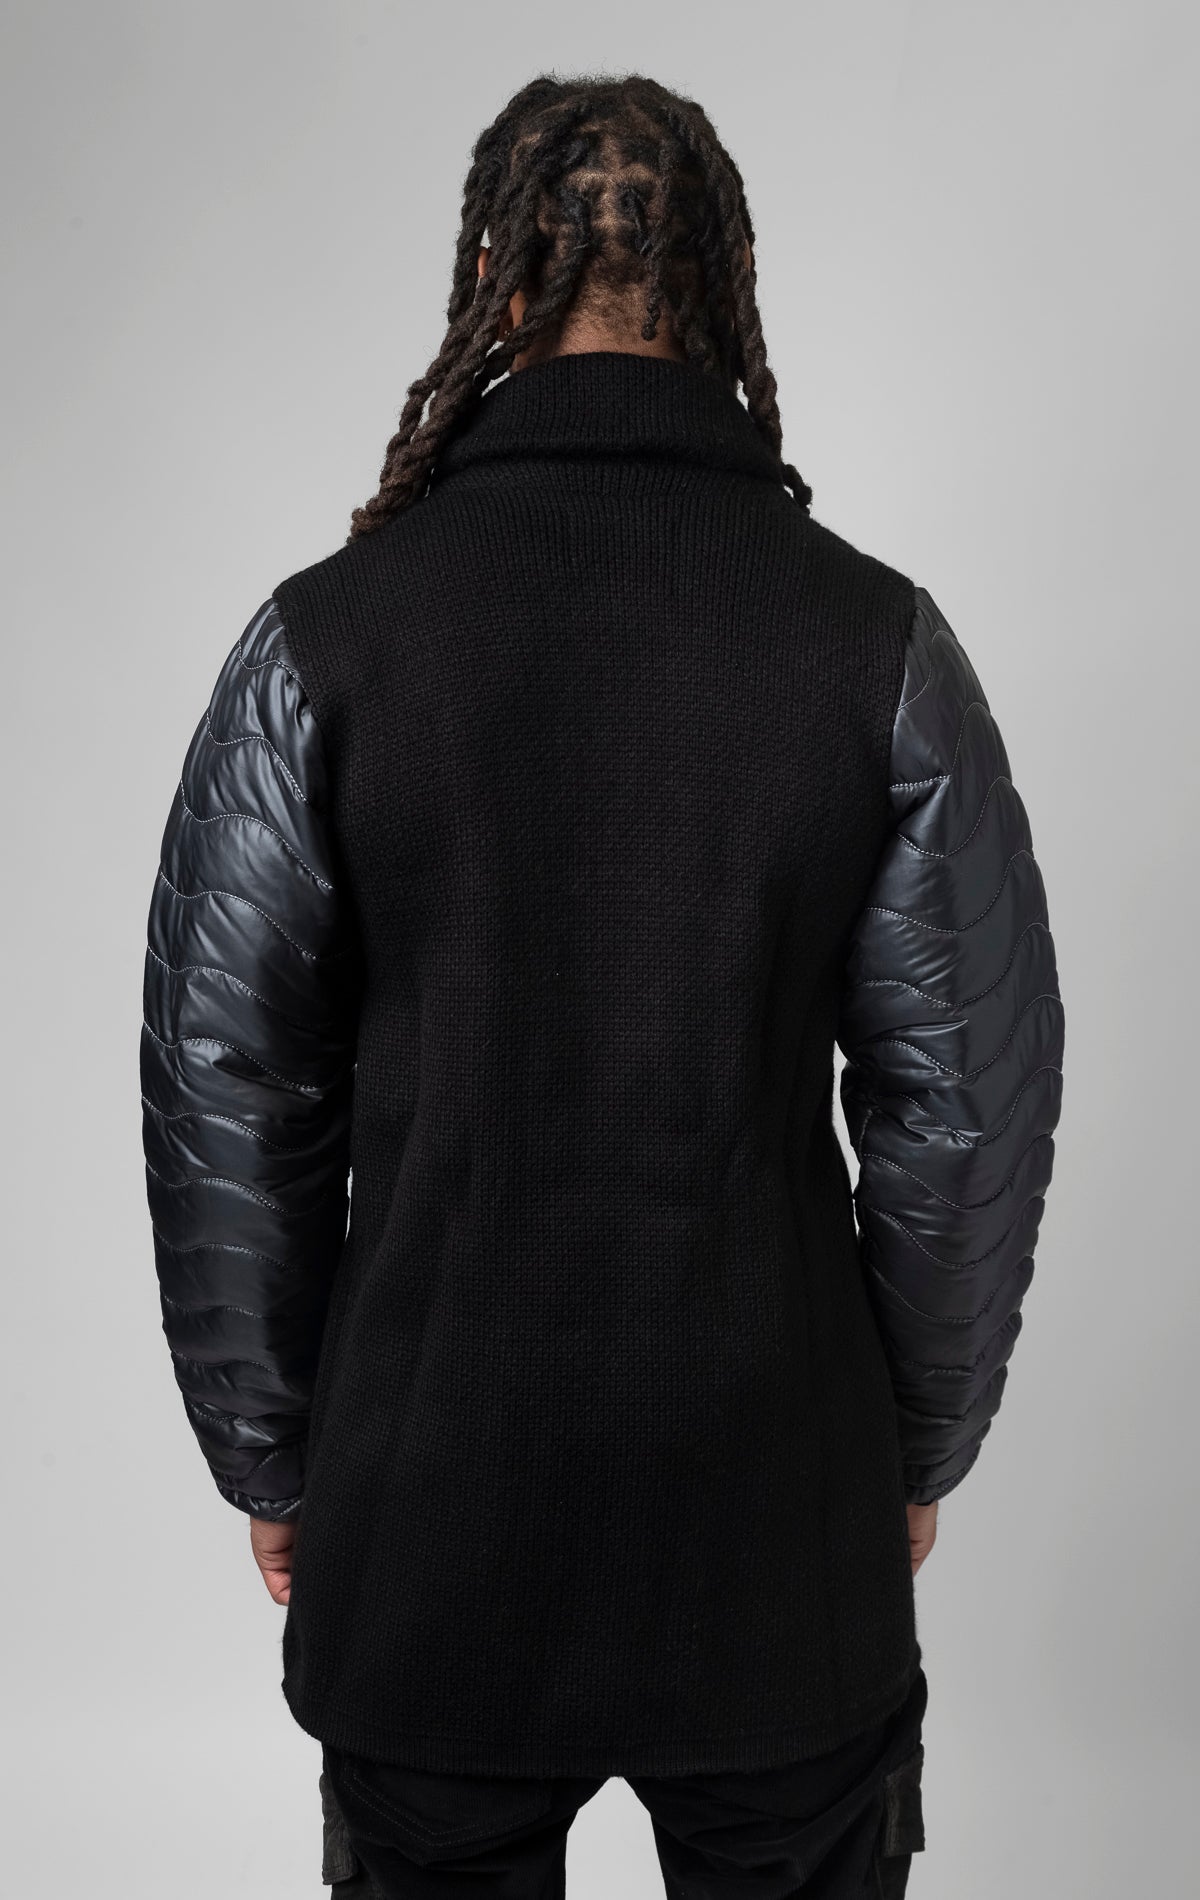 black coat made of contrasting fabrics, with a wool front and puffer sleeves.